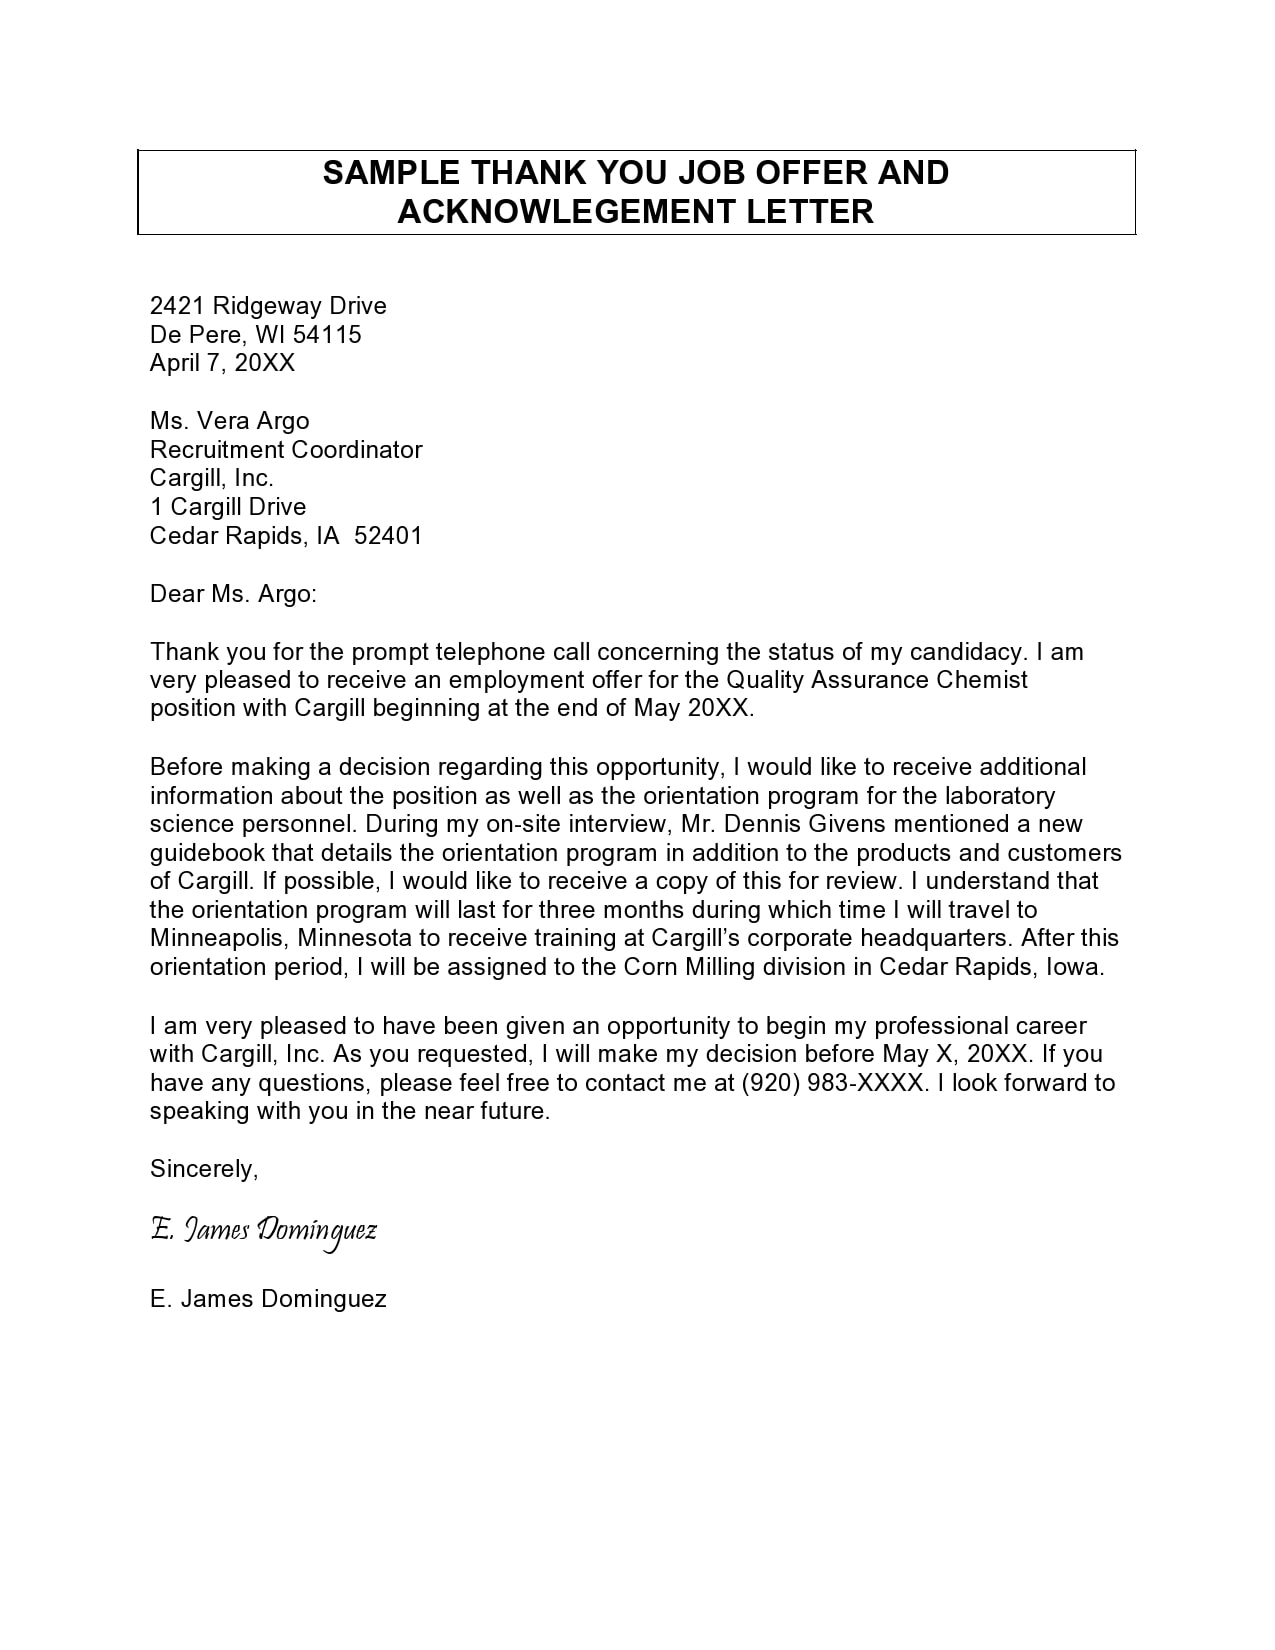 Thank You Letter To Recruiters from templatearchive.com